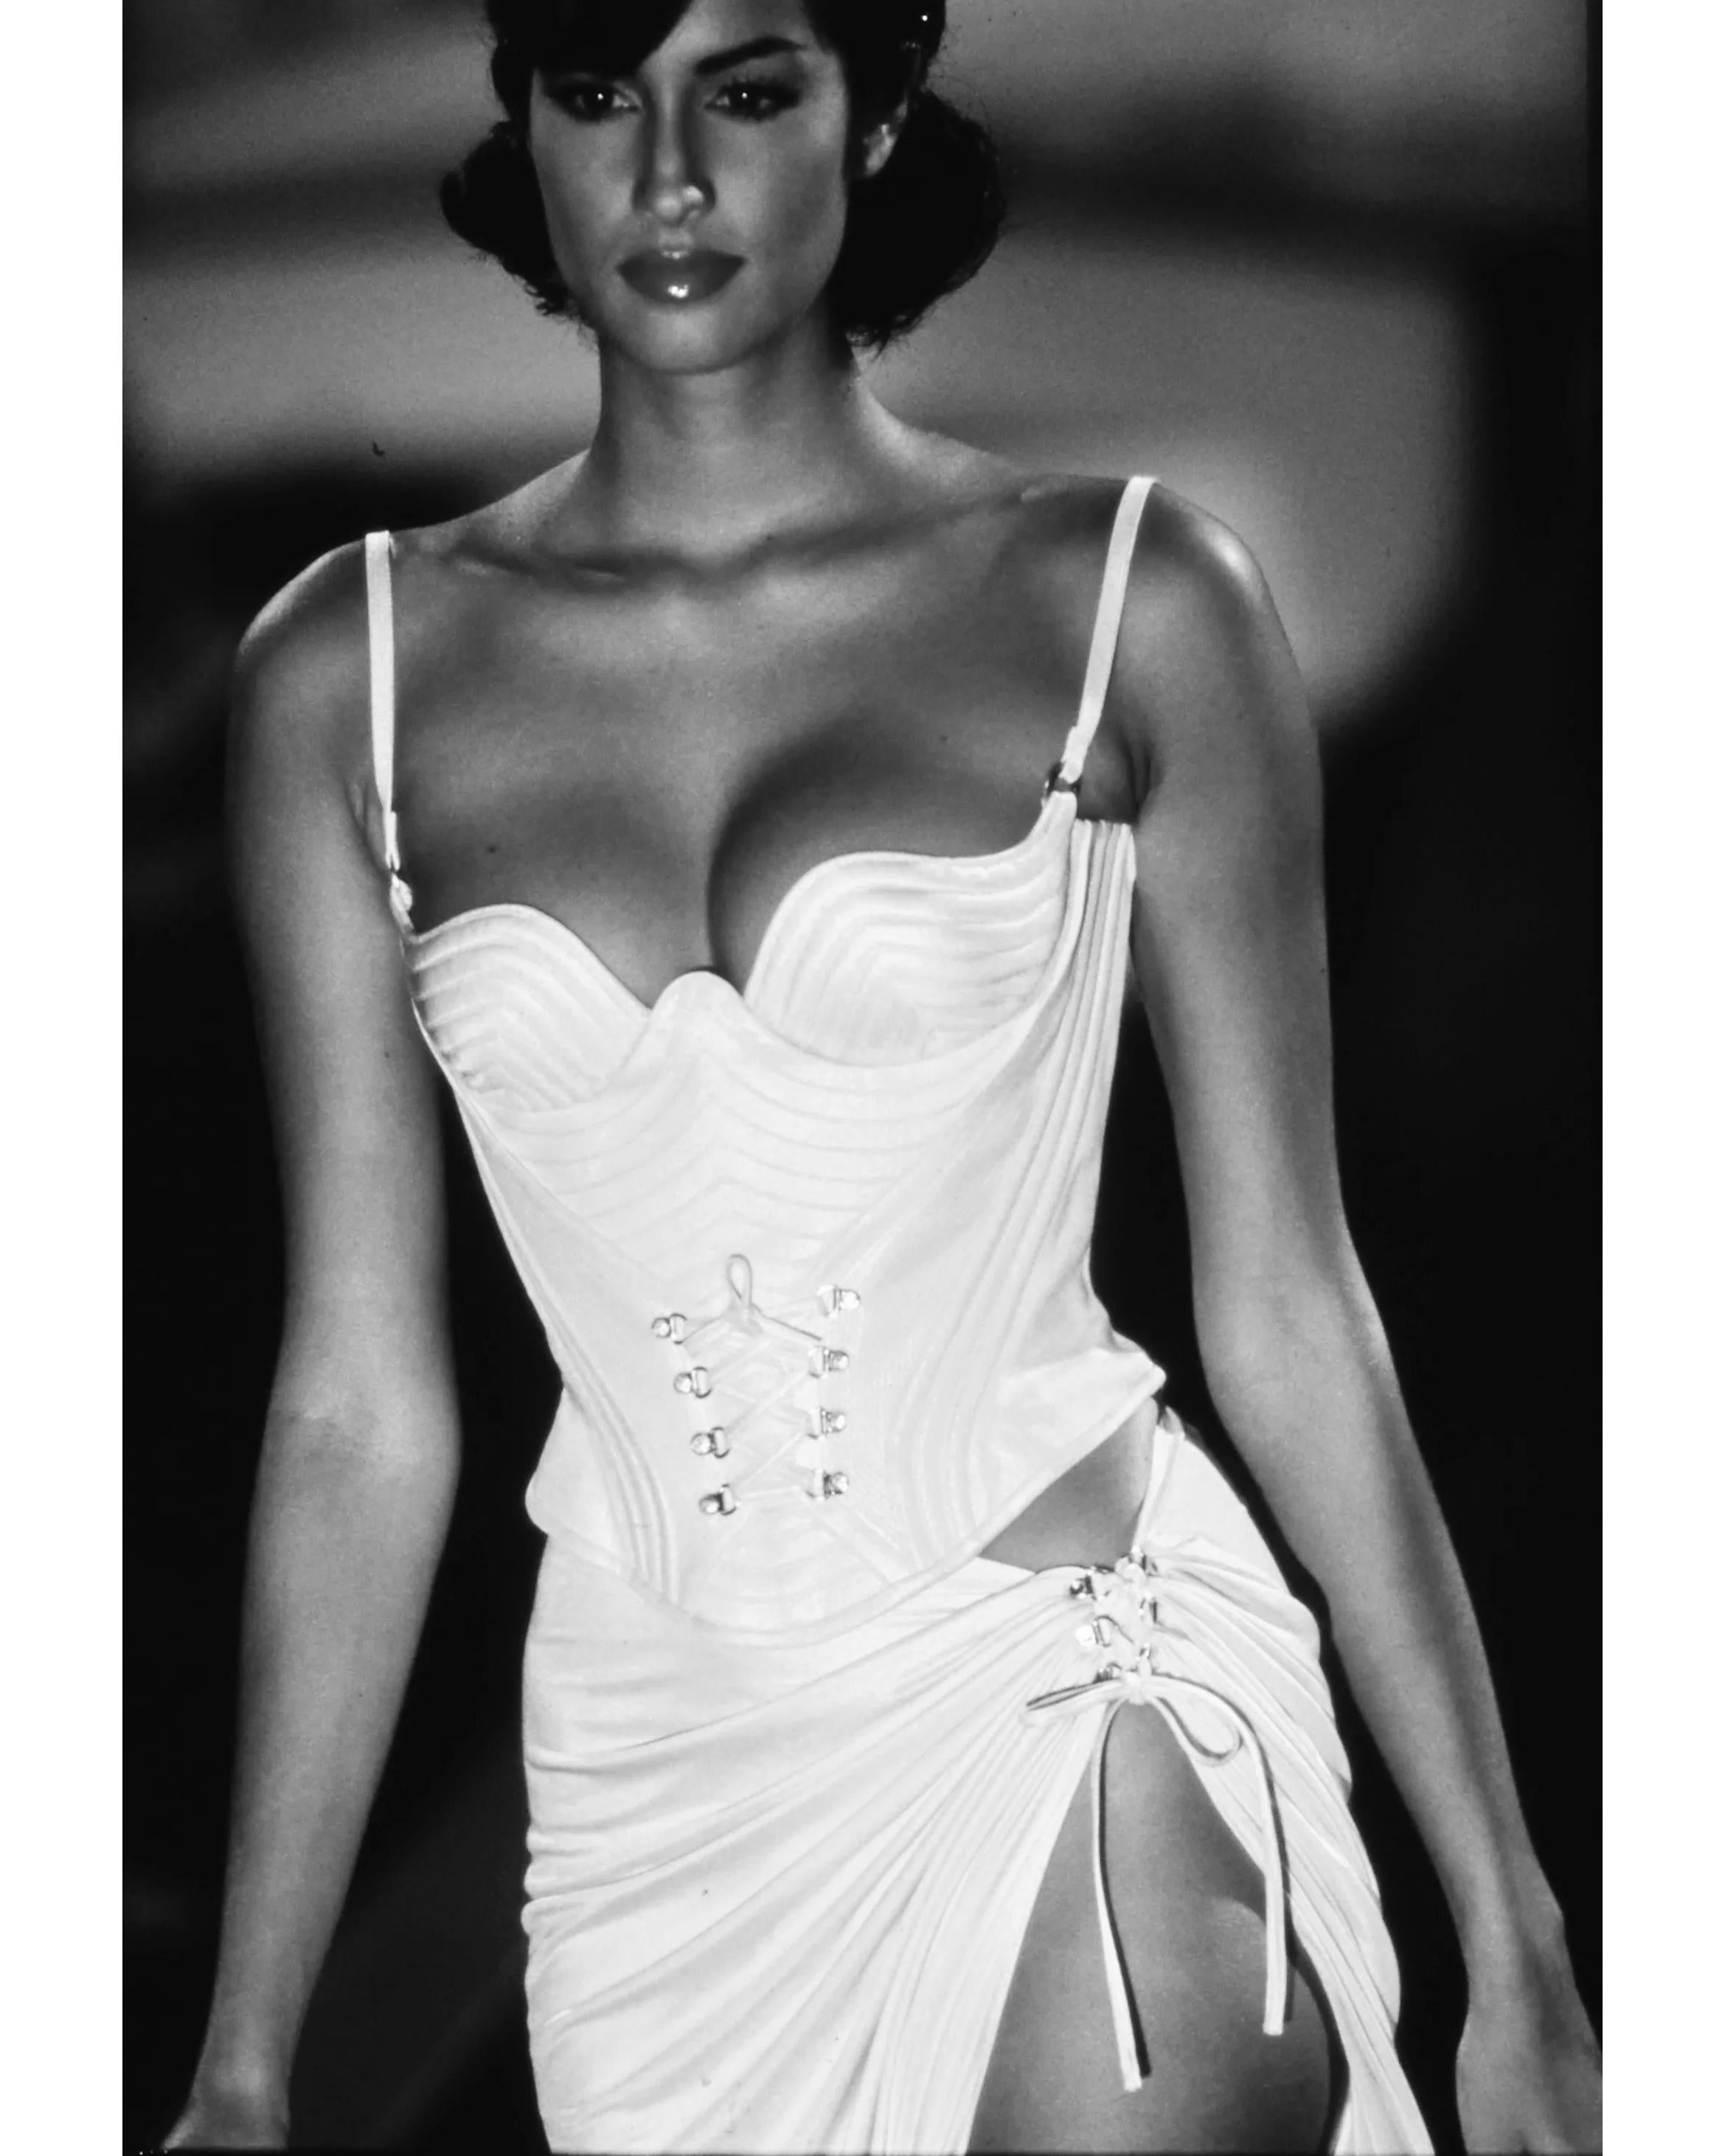 S/S 1995 Gianni Versace ecru lace-up corset top. Lace-up details at front waist and lace-up back with curved corset bodice, with gunmetal hardware. Sleeveless top with thin spaghetti straps. As seen on Yasmeen Ghauri on the runway (Look 74) in